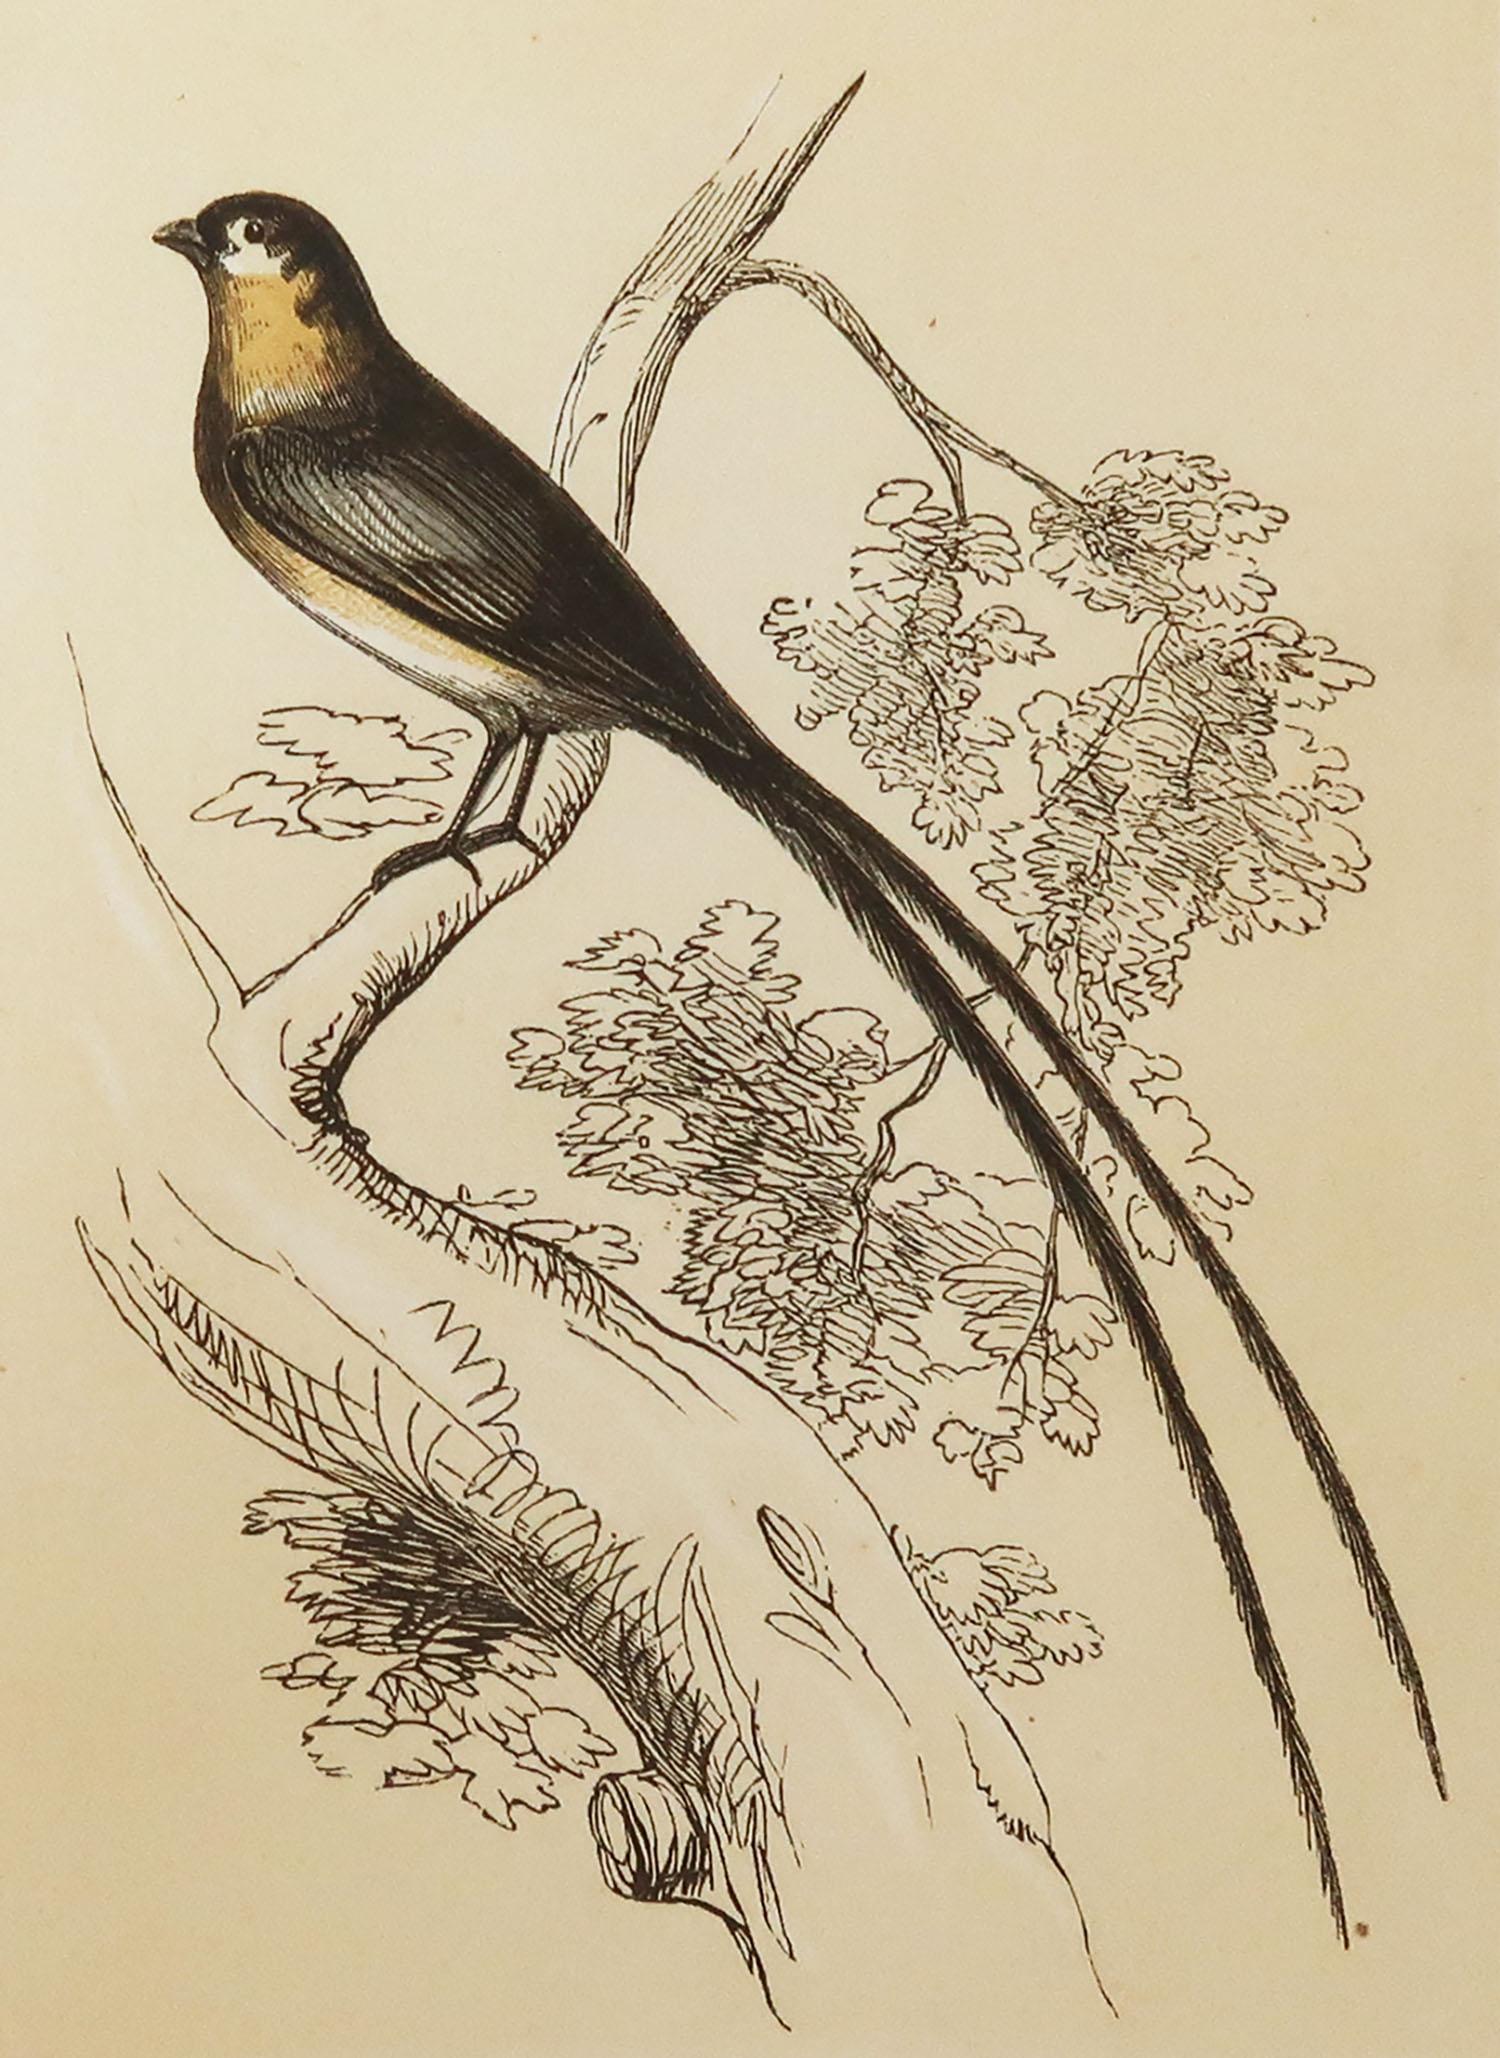 Great image of a whidah finch

Unframed. It gives you the option of perhaps making a set up using your own choice of frames

Lithograph with original color.

Published by Tallis circa 1850

Crudely inscribed title has been erased at the